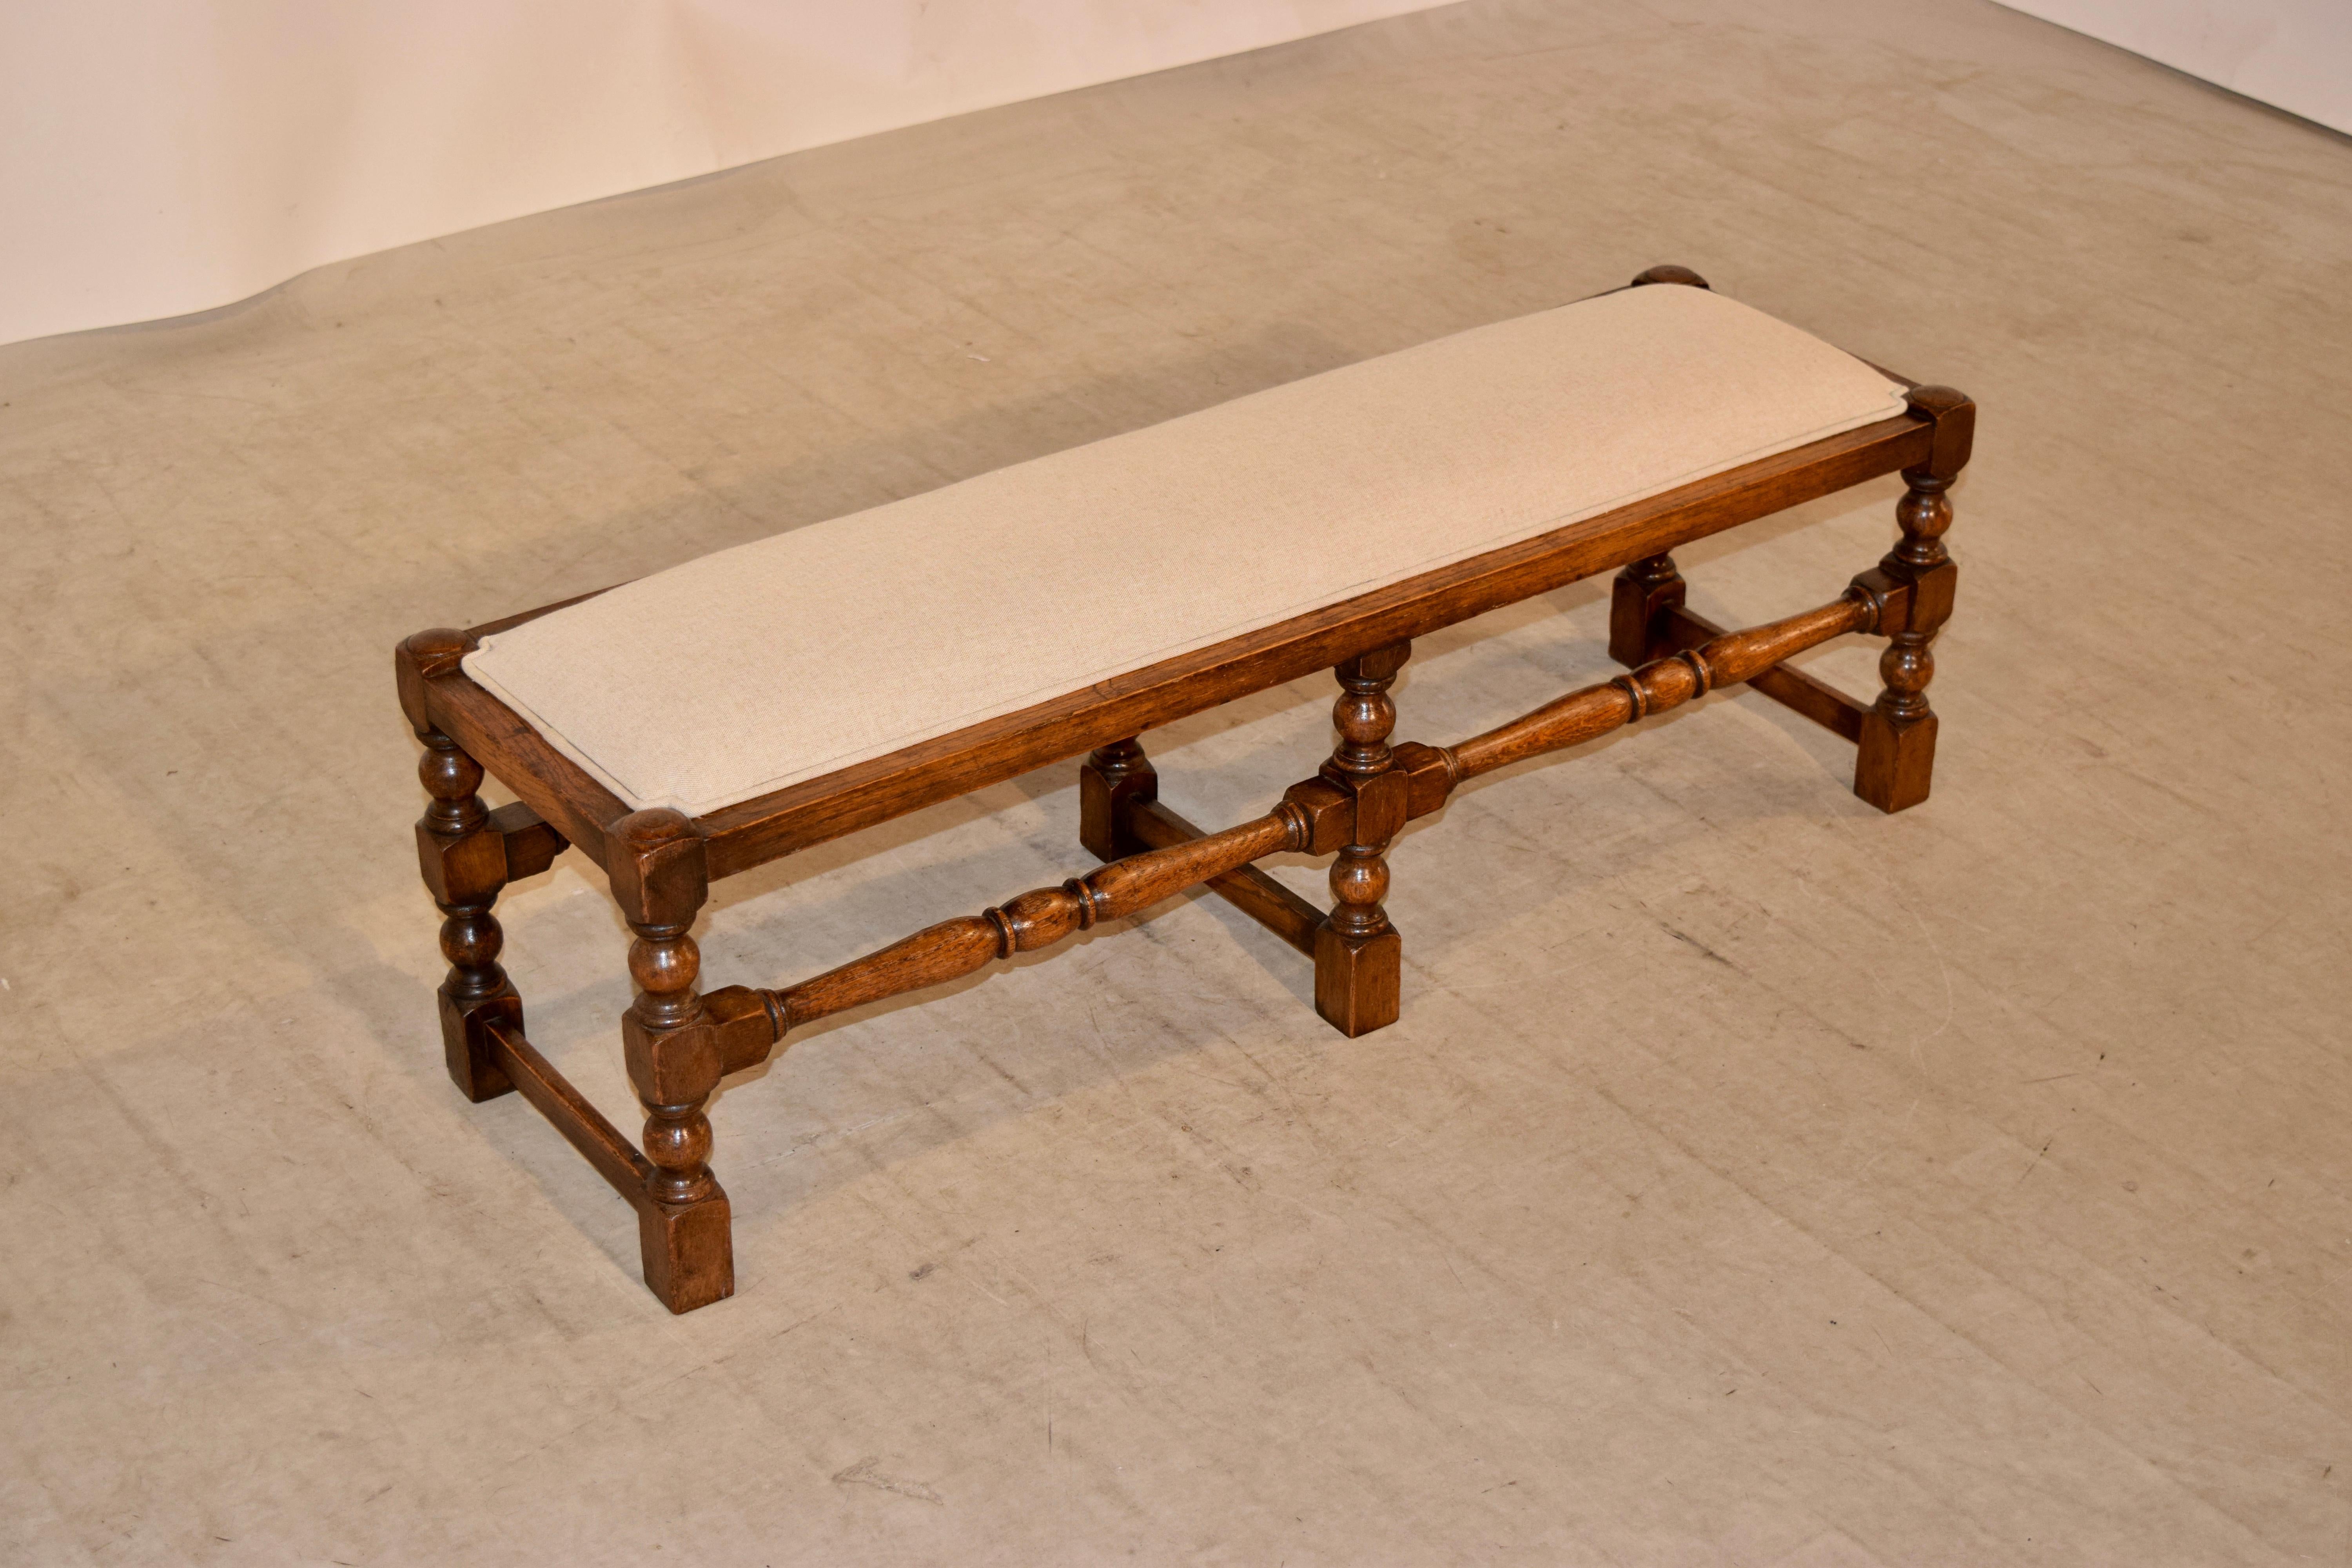 19th century English oak turned bench with a newly upholstered seat in linen, finished with a single welt decoration. The frame has hand-turned legs and stretchers.